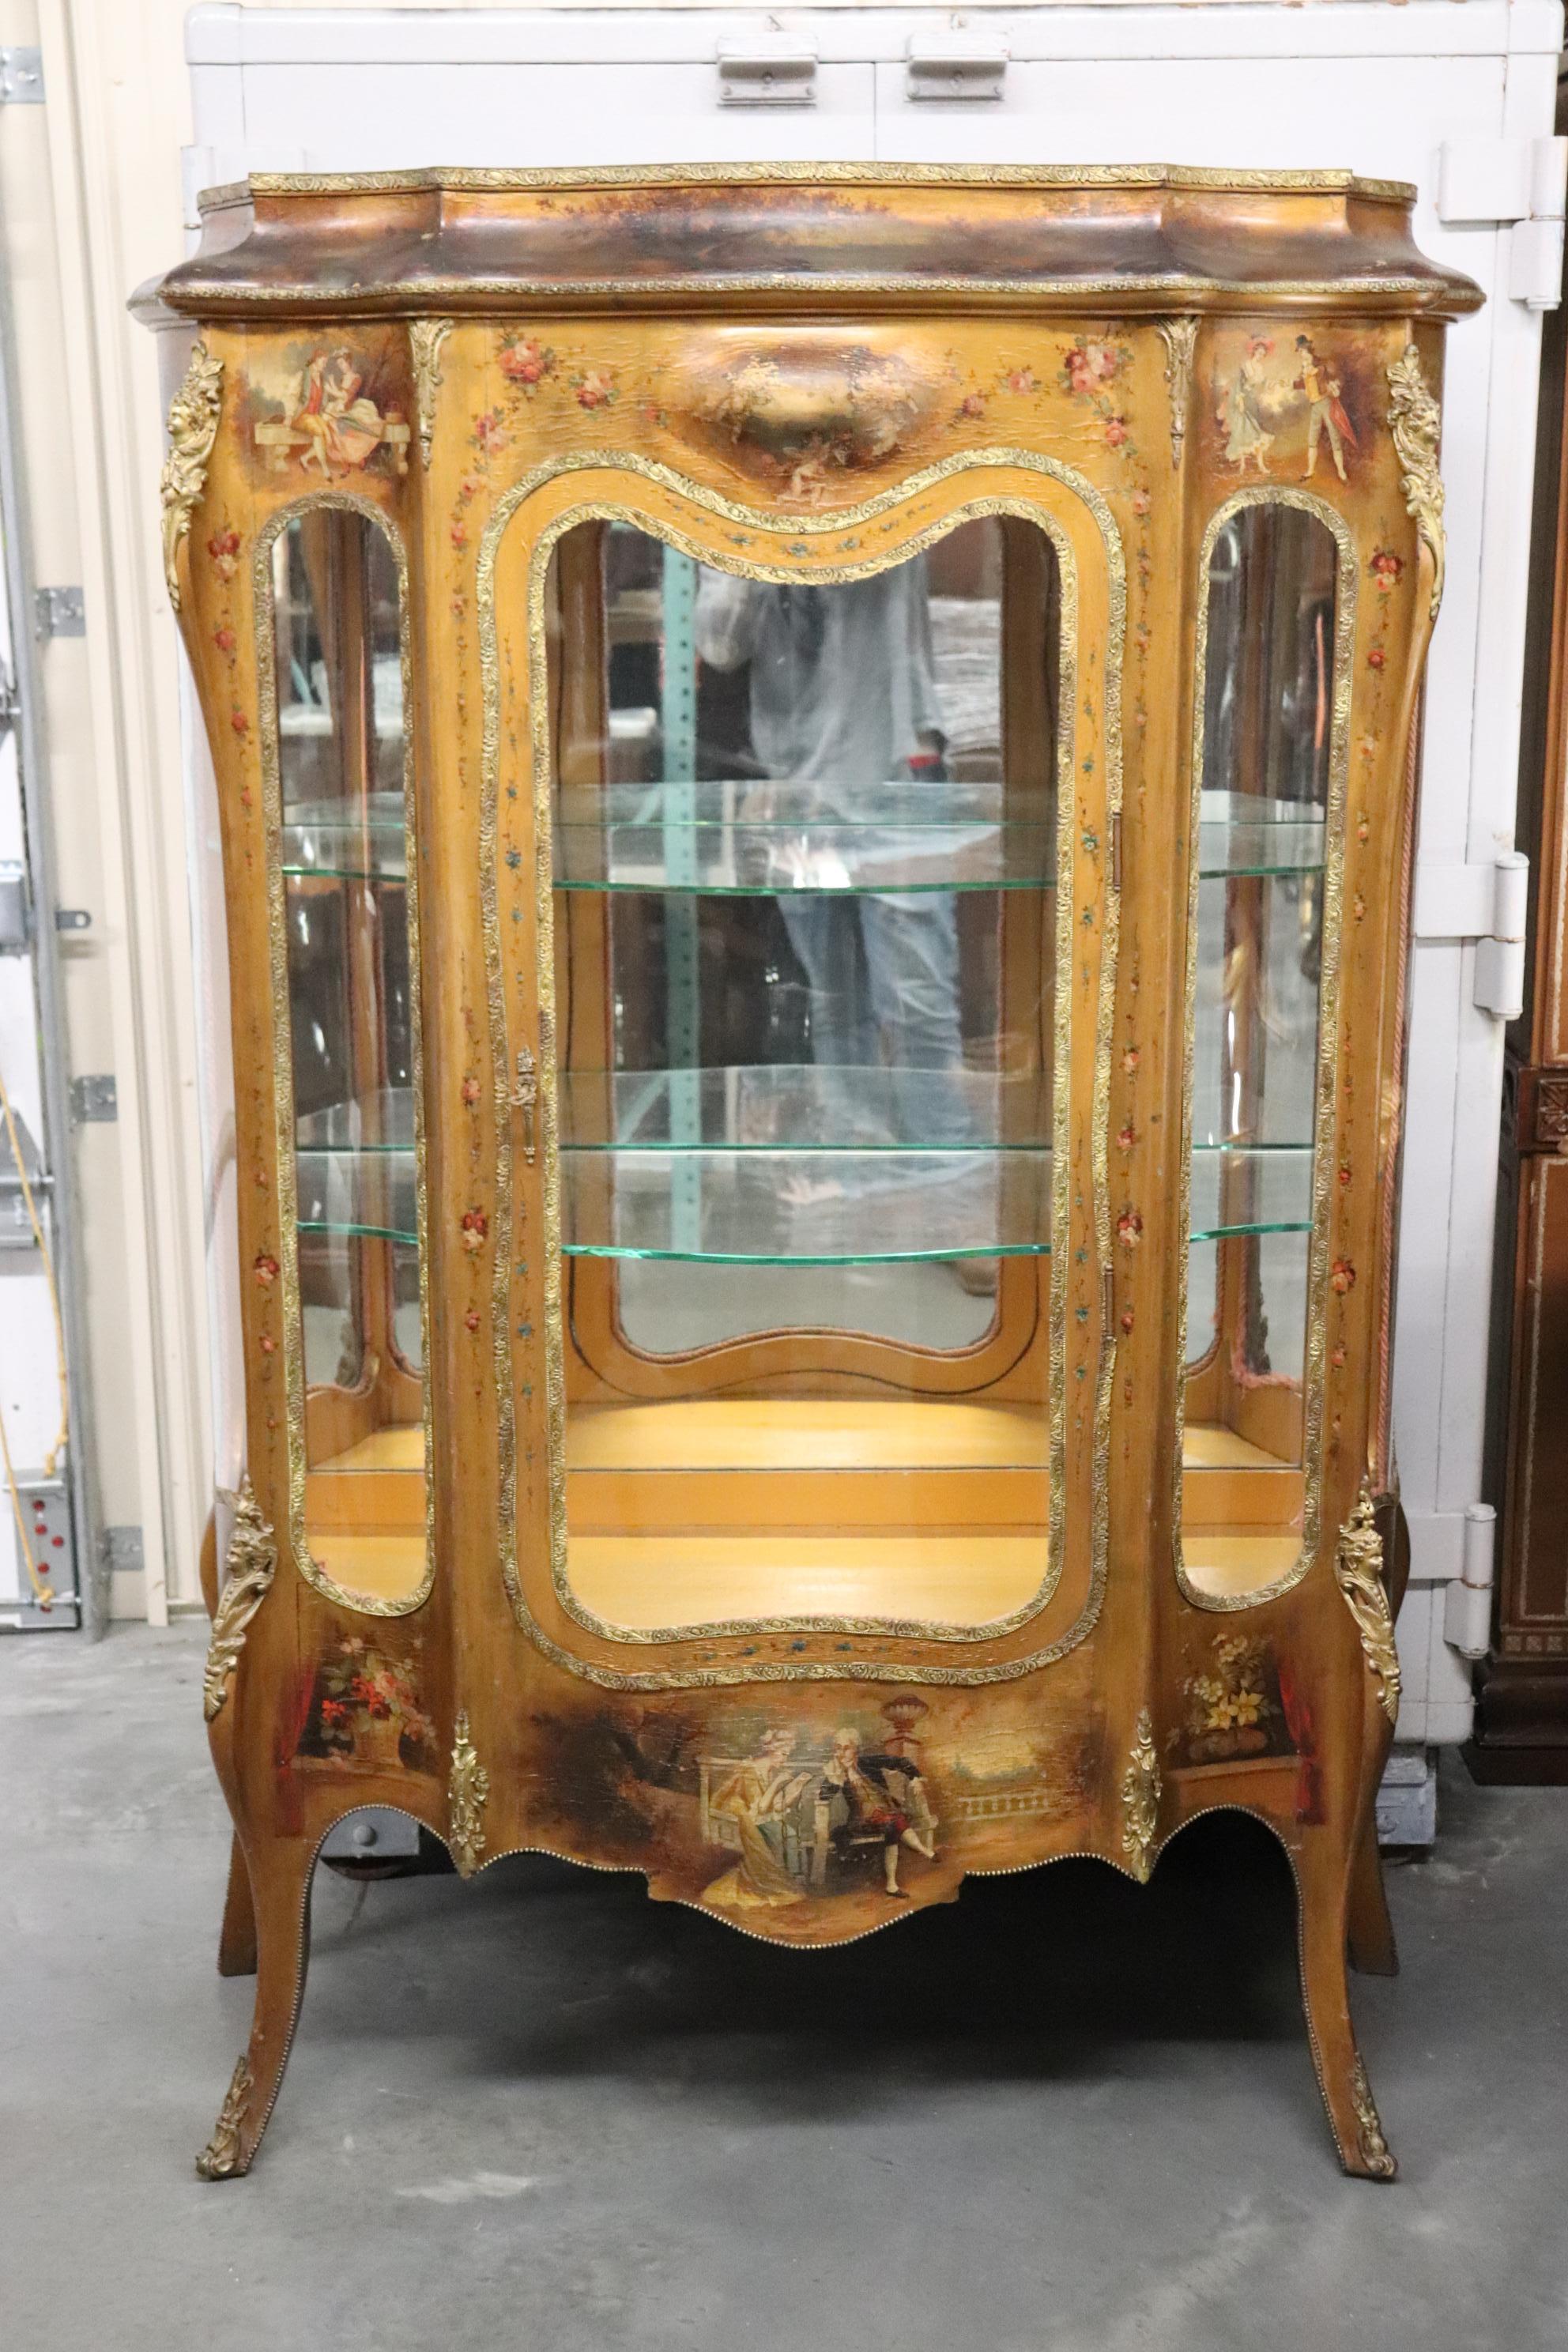 This is a fantasic Rococo style Italian-made gilded Vernis Martin china cabinet. The cabinet is lavshly gilded in genuine gold leaf and has beautiful exterly cast solid bronze figures and ormolu. The cabinet is extremely complex and offers plenty to